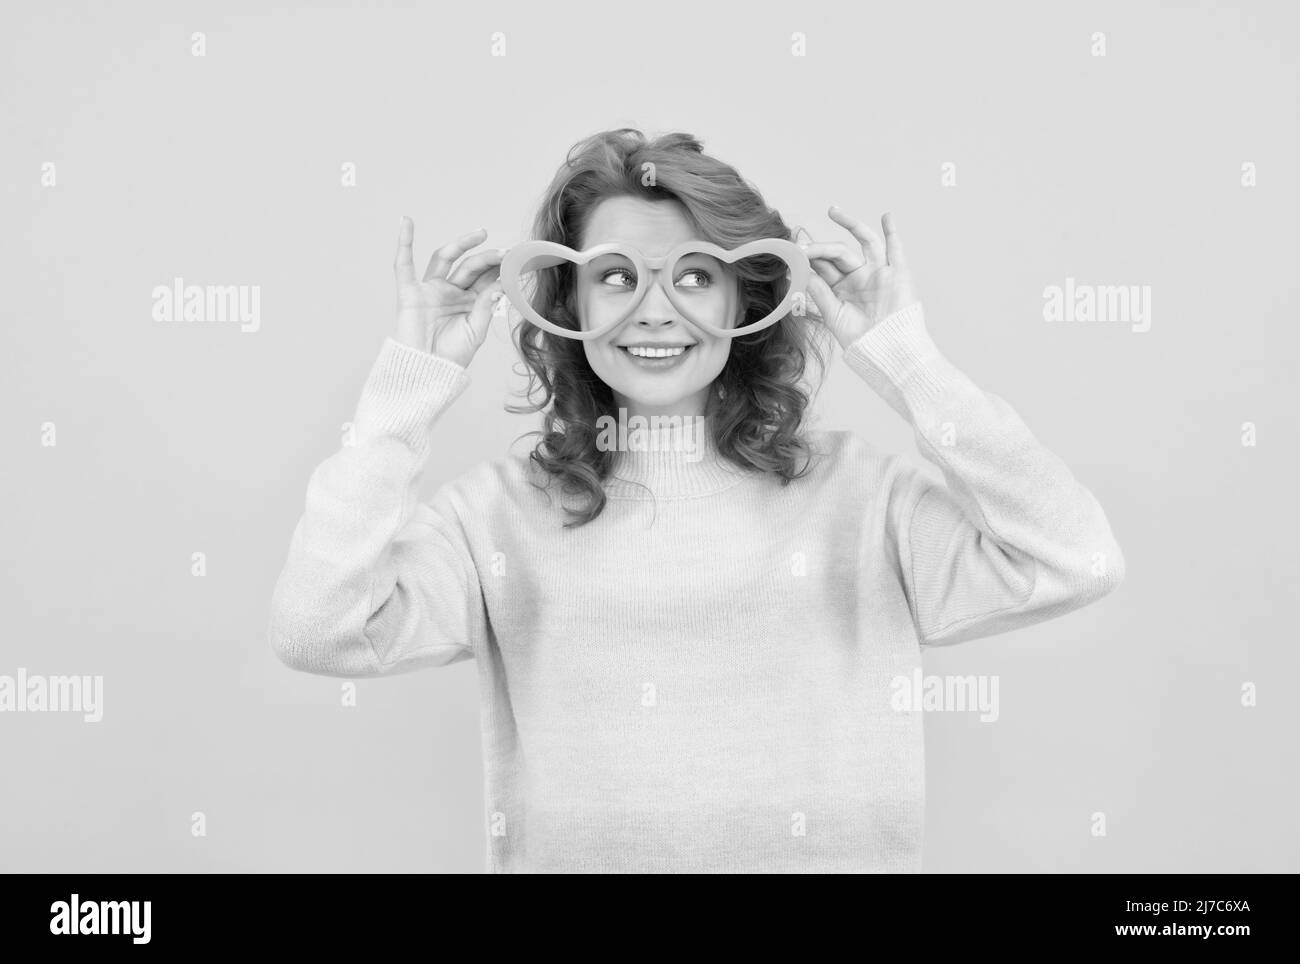 happy redhead woman wear funny party glasses on yellow background, good mood Stock Photo